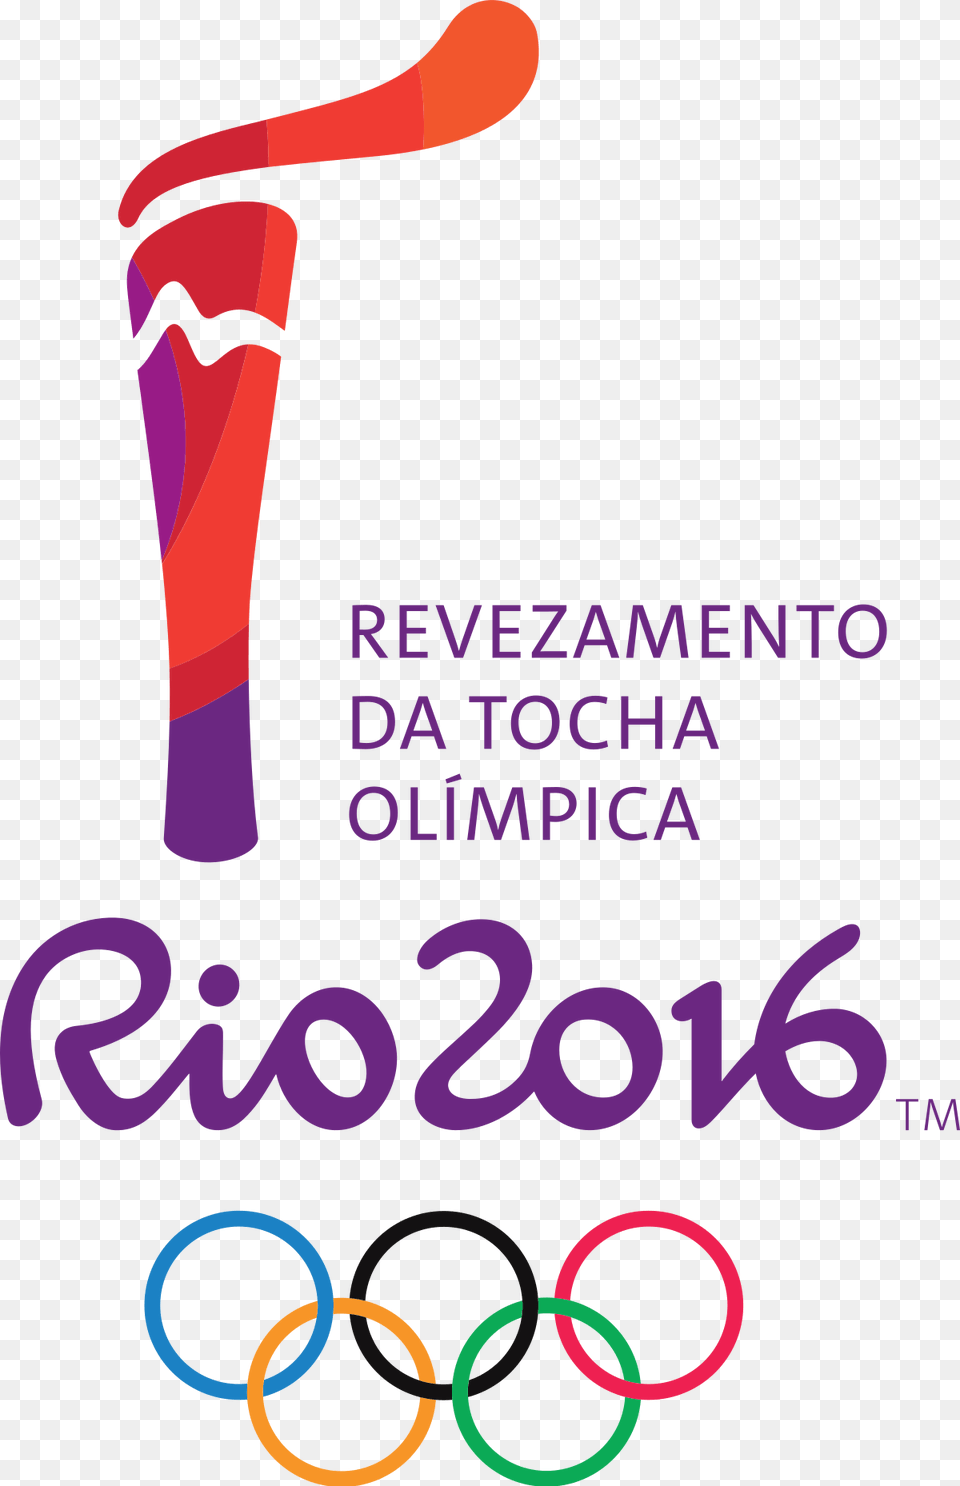 Olympics Rio Torch Relay Logo Olympic Torch Relay Rio 2016, Light, Advertisement, Poster, Dynamite Png Image